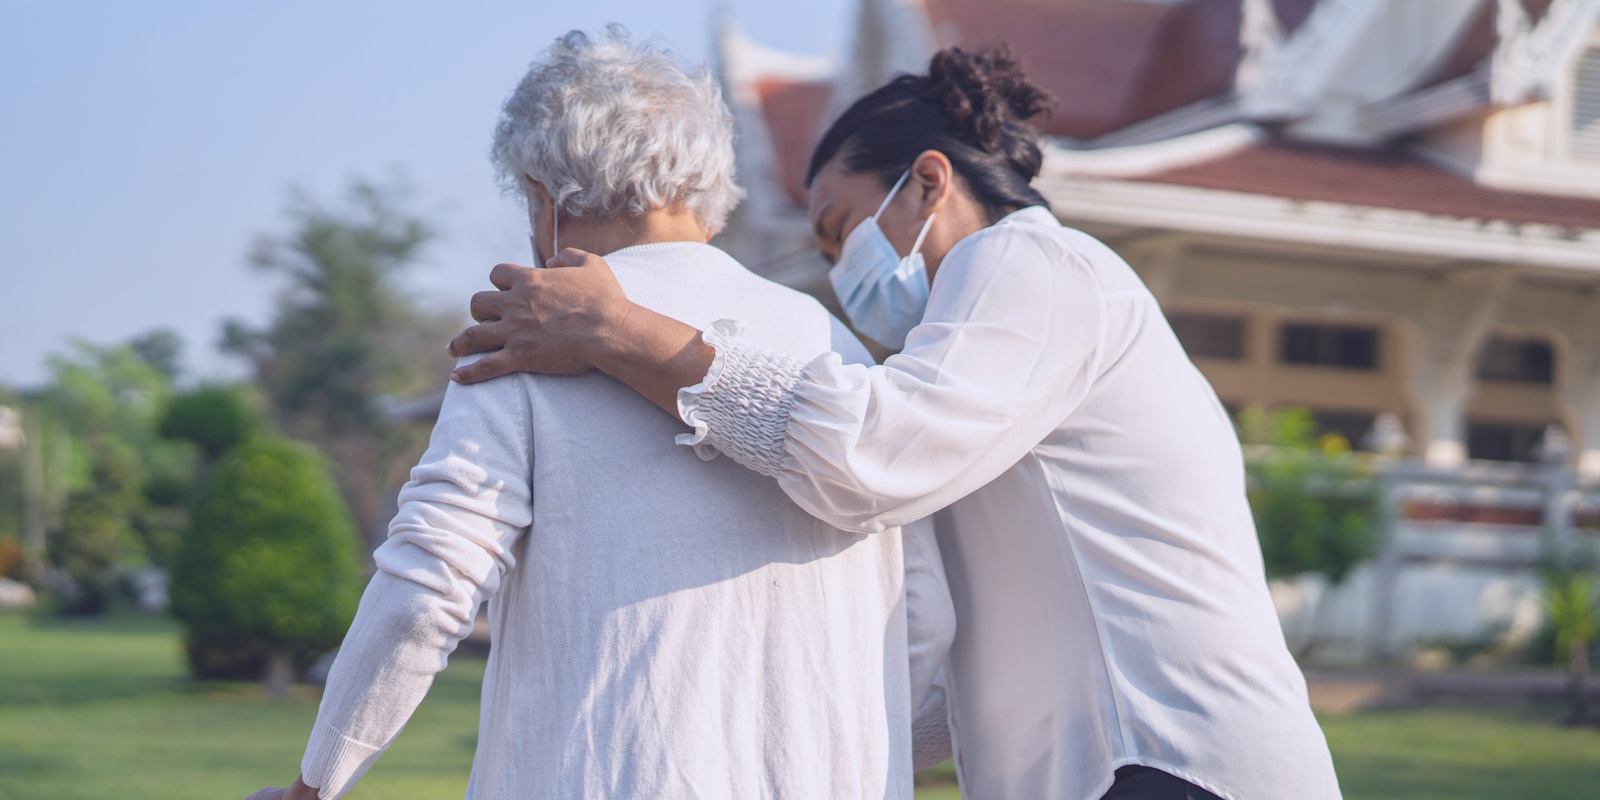 Finding Respite Care Solutions: Options for Short-Term Relief